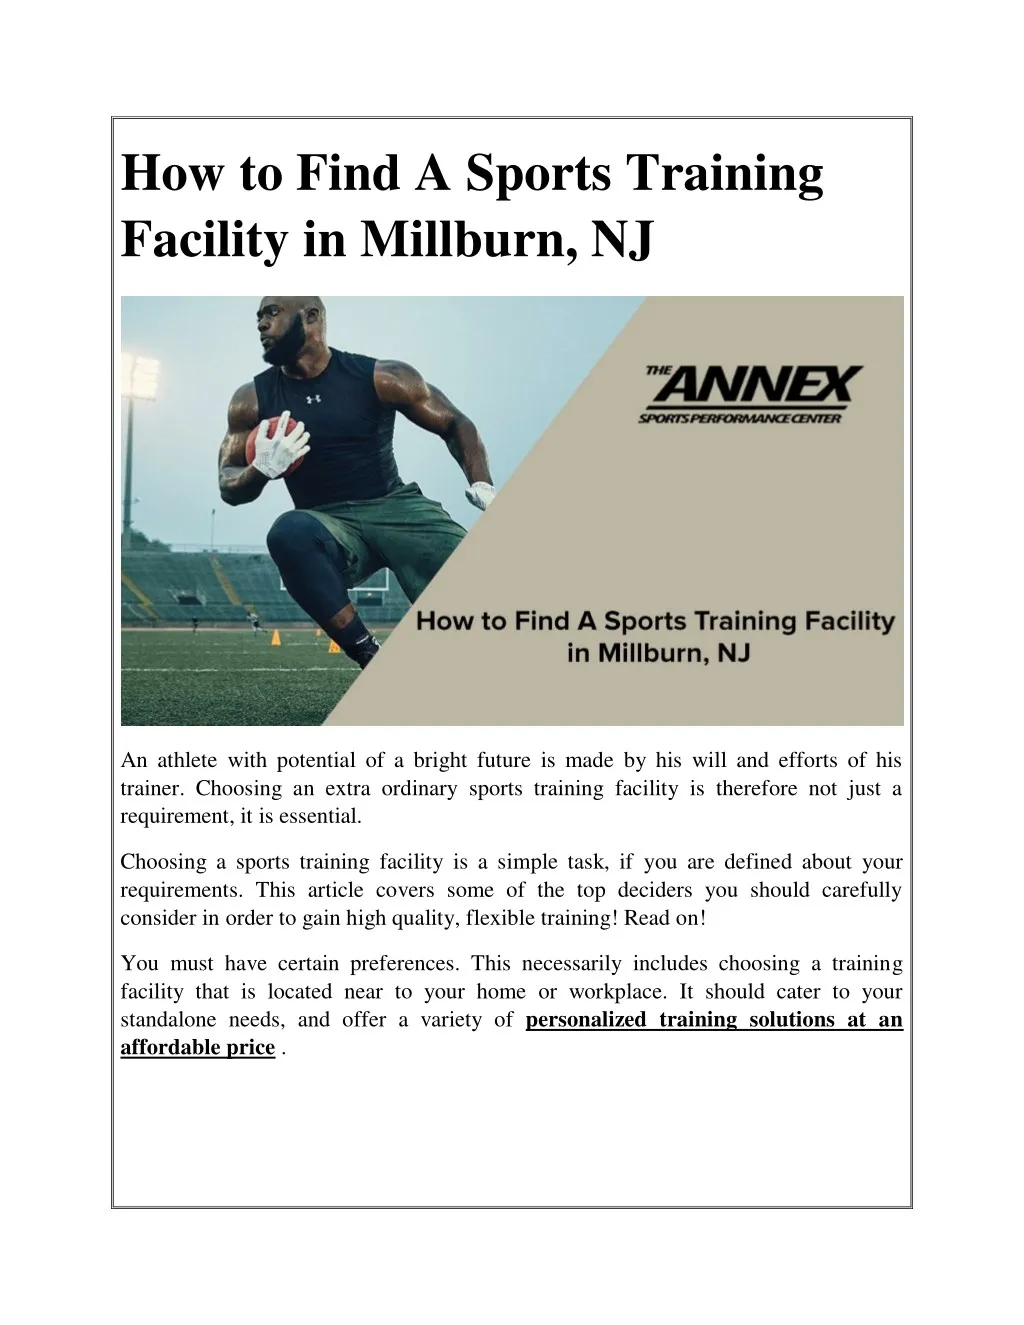 how to find a sports training facility